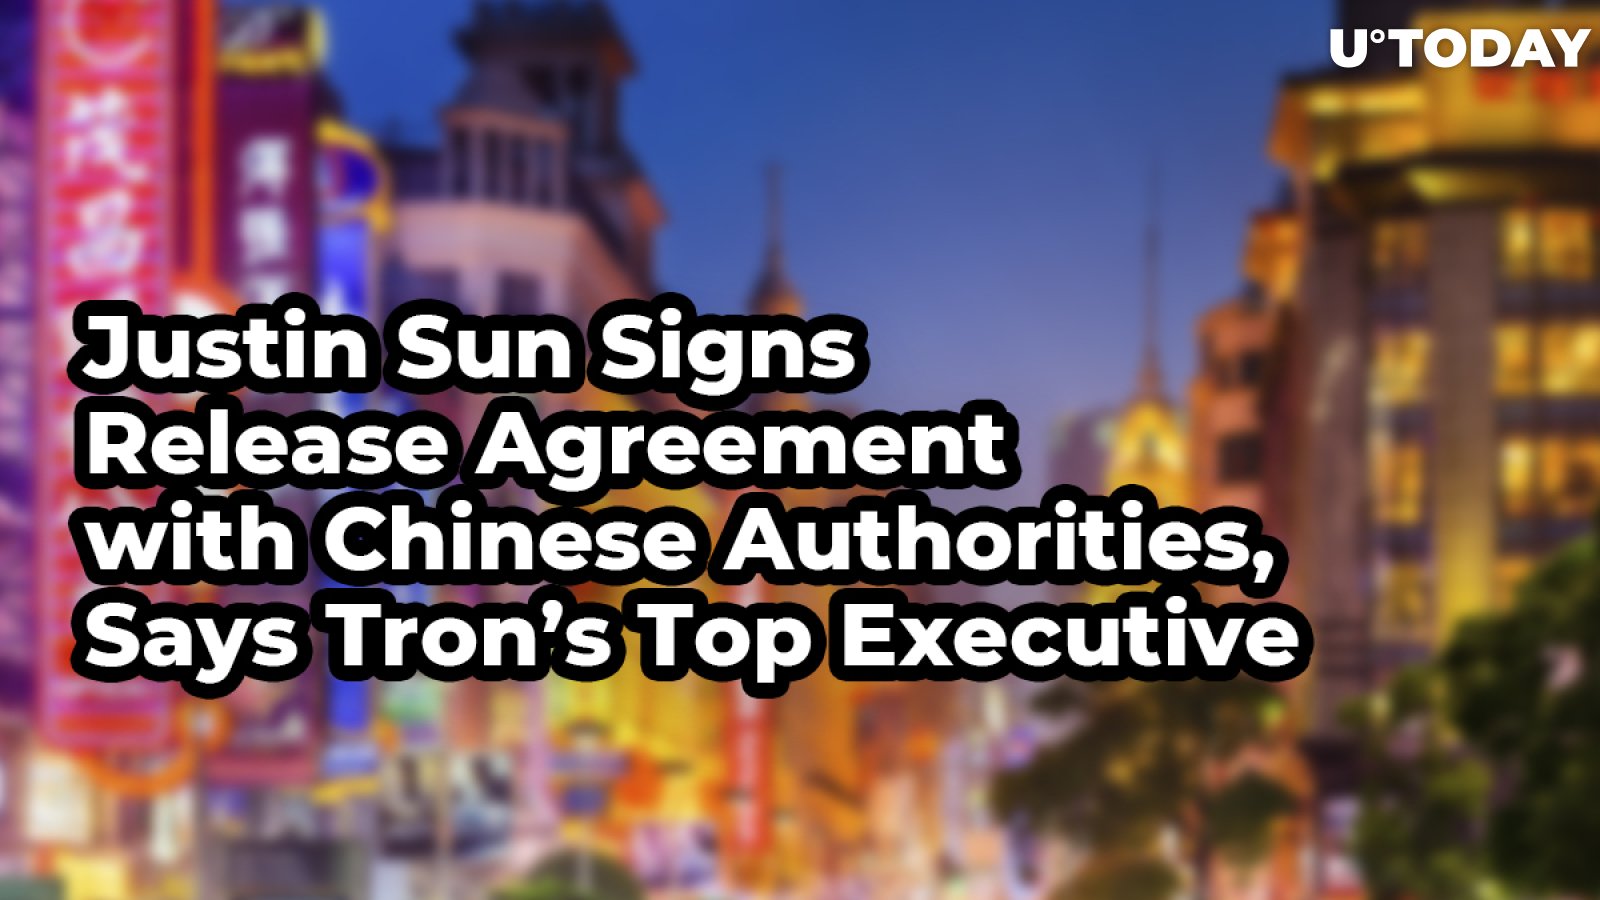 Justin Sun Signs Release Agreement with Chinese Authorities, Says Tron’s Top Executive